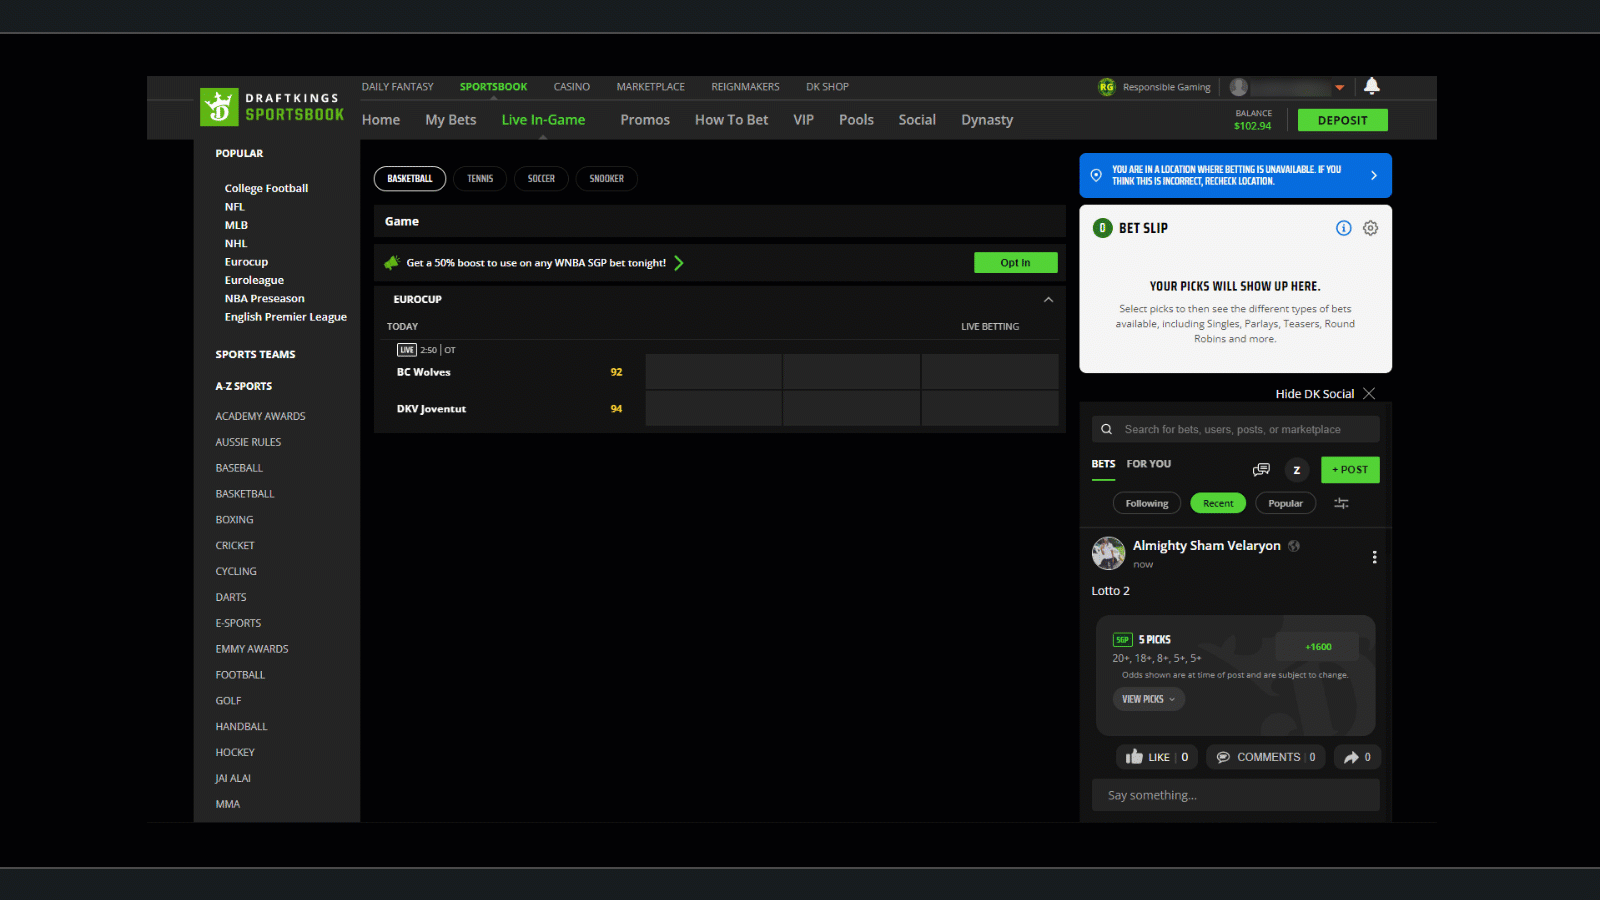 Visual walkthrough of how to close your DraftKings account via the DraftKings website